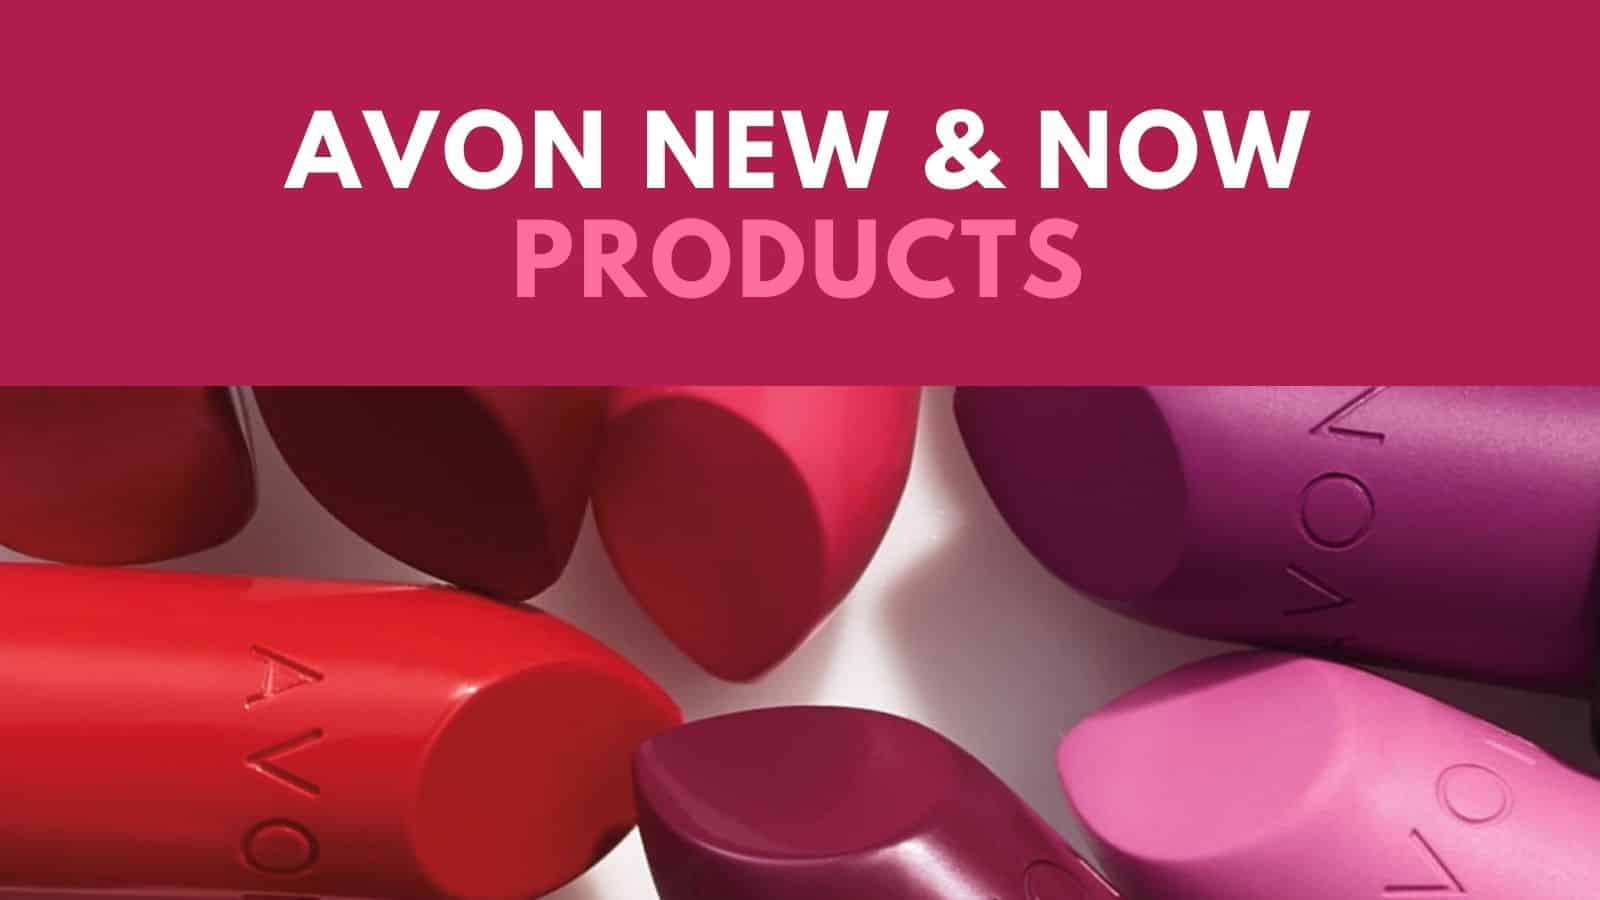 New Avon Products